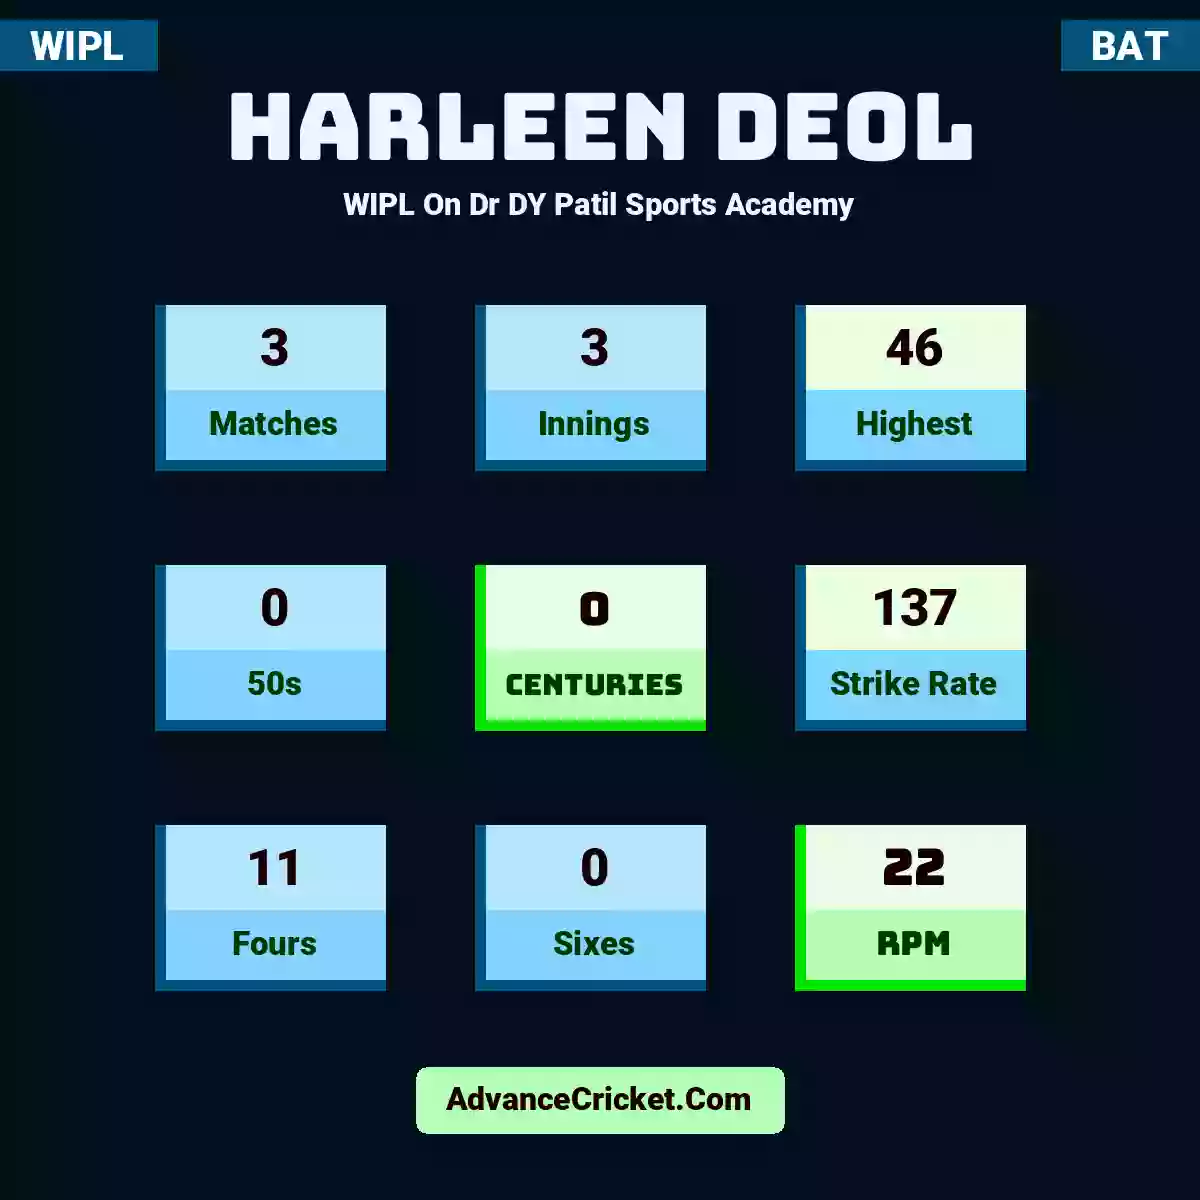 Harleen Deol WIPL  On Dr DY Patil Sports Academy, Harleen Deol played 3 matches, scored 46 runs as highest, 0 half-centuries, and 0 centuries, with a strike rate of 137. H.Deol hit 11 fours and 0 sixes, with an RPM of 22.